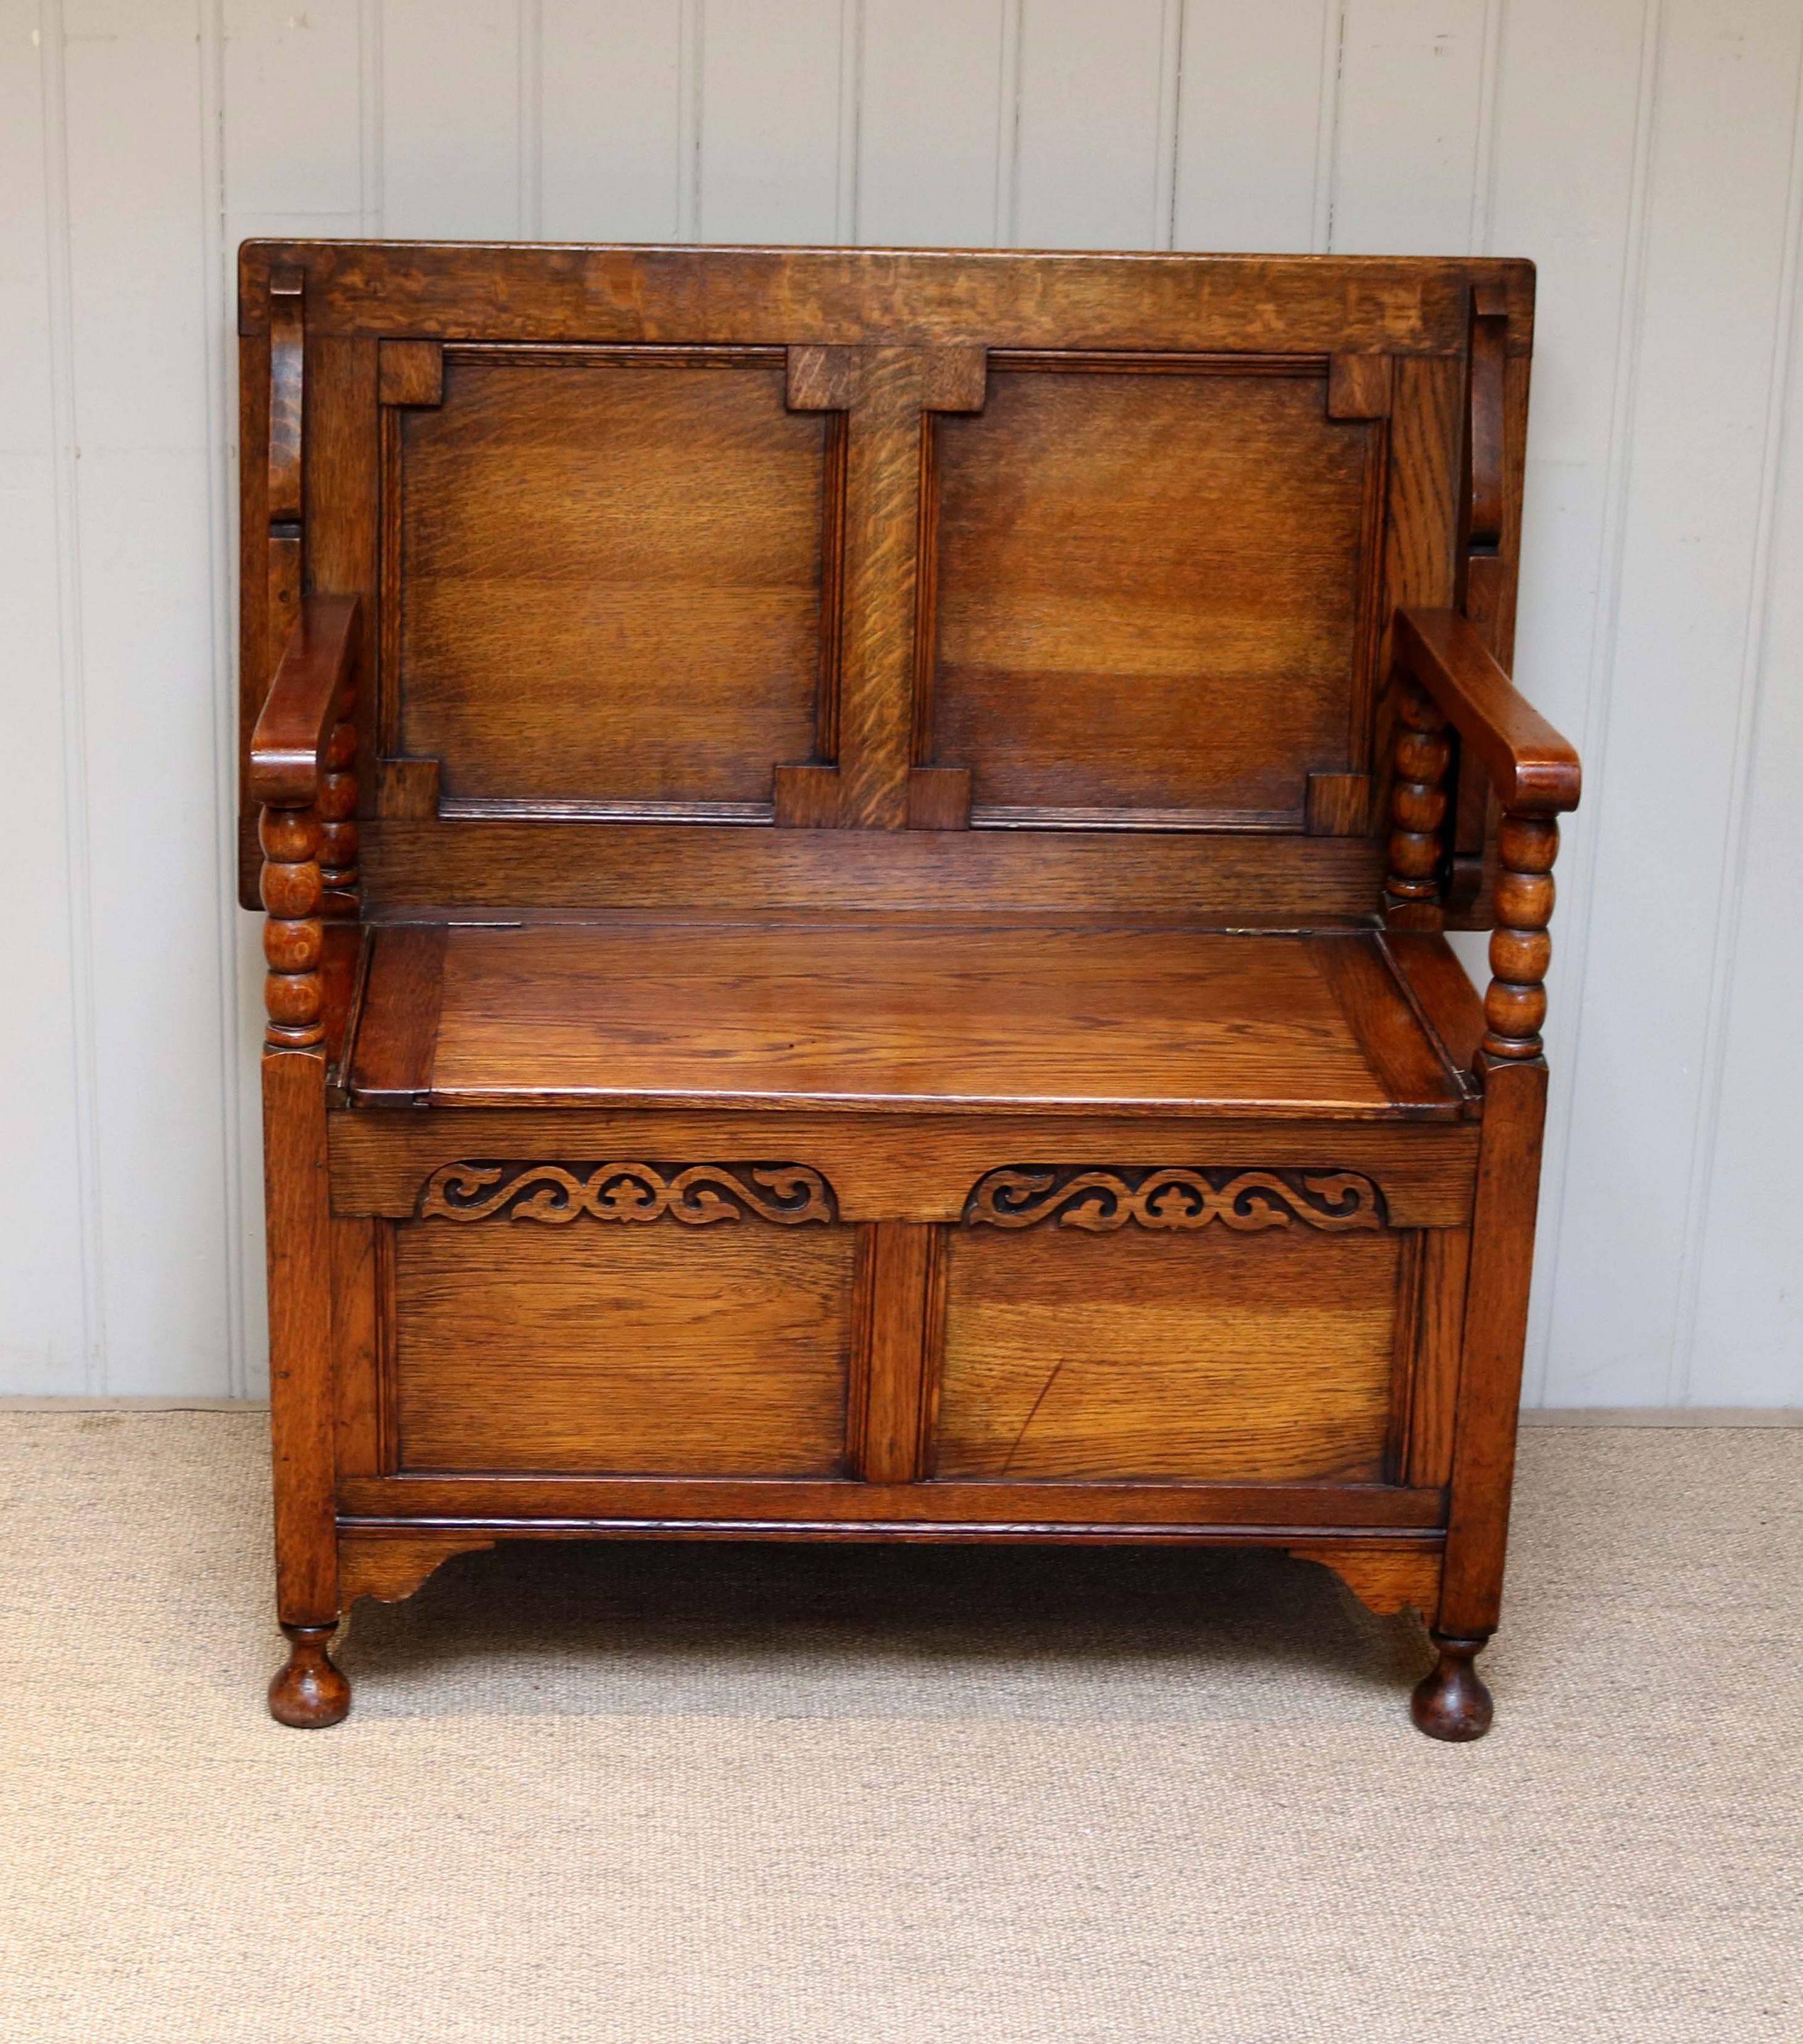 Golden oak monks bench having a panelled front and back with carved detail to the front edge with a lift up seat for storage and a top that folds to become a table having bobbin turned supports. Measure: The height when folded is 72cm.